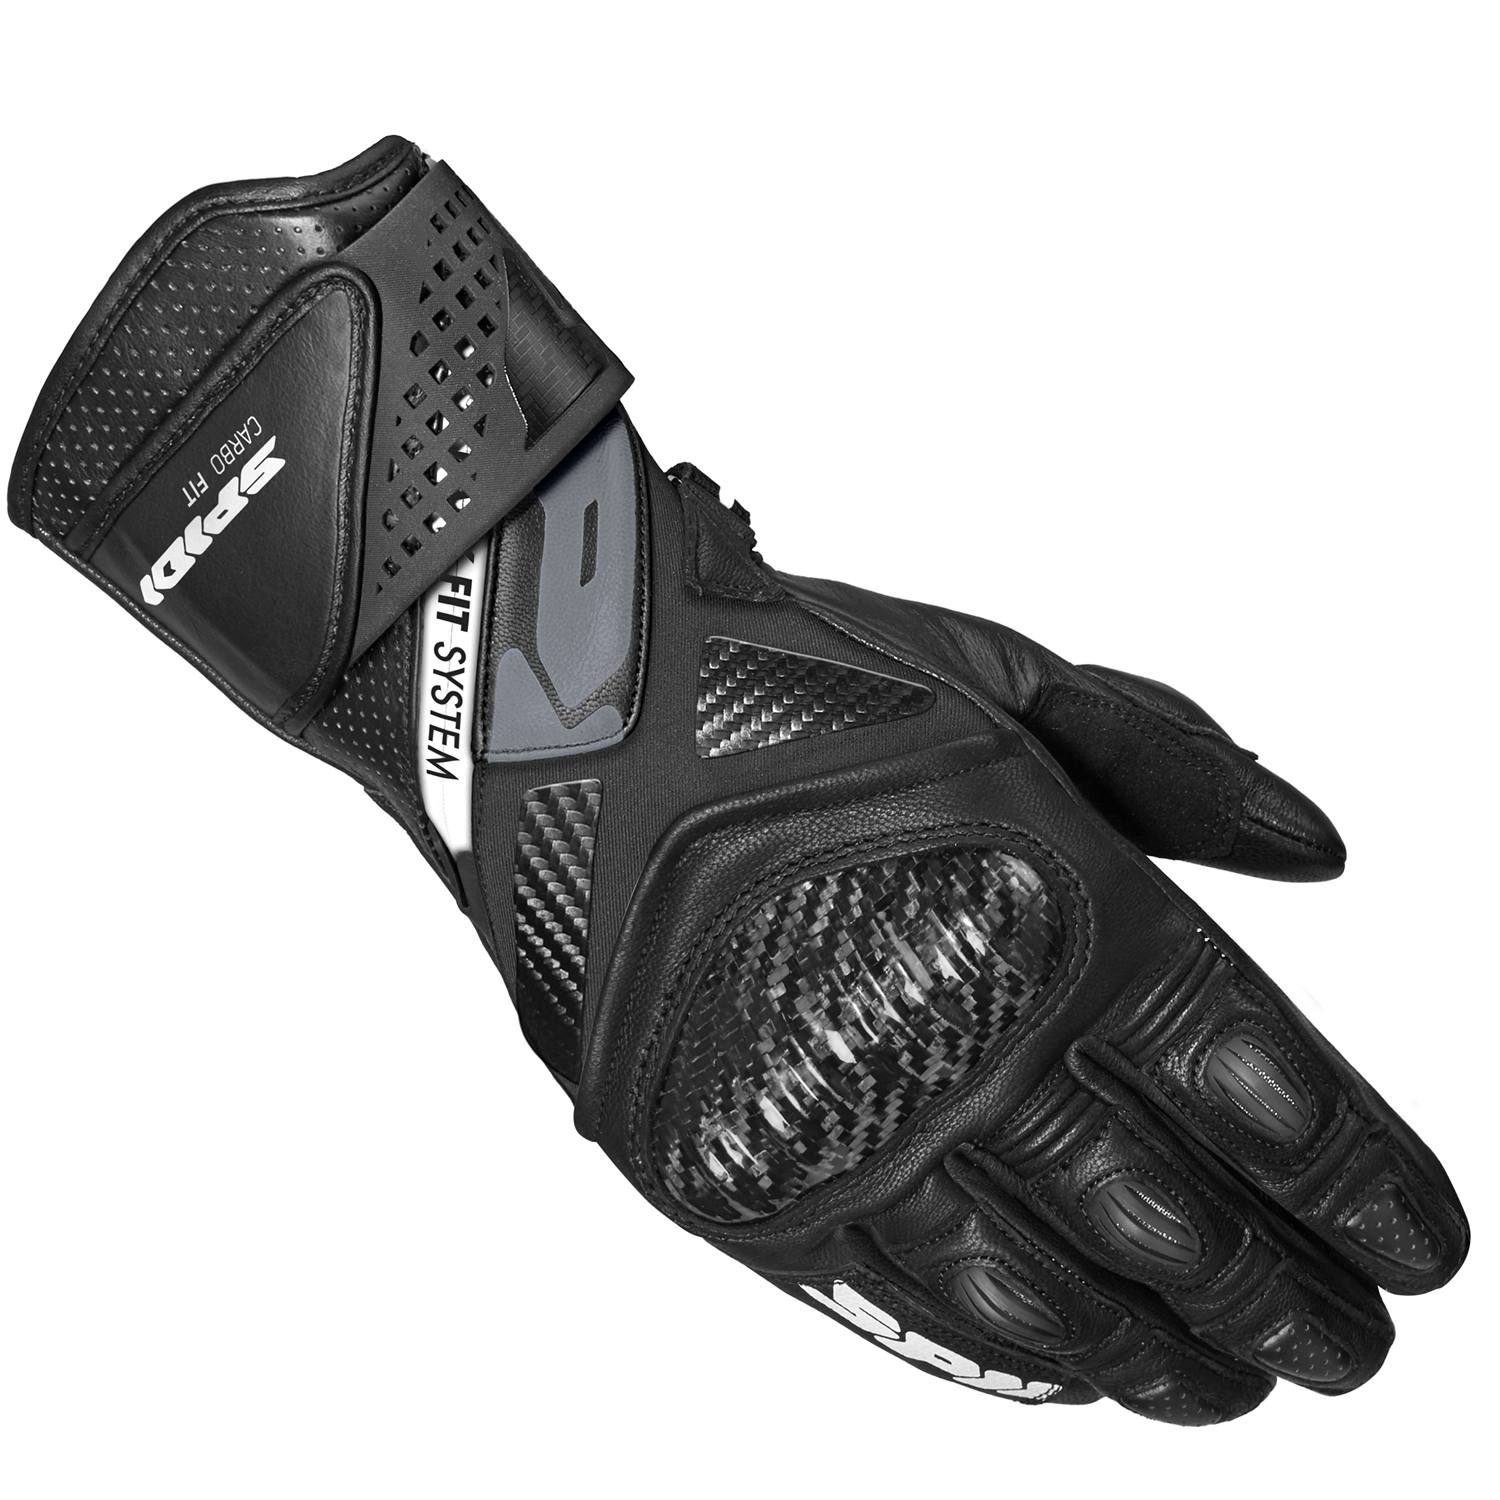 Image of Spidi Carbo Fit Gloves Black Size 2XL ID 8030161481518